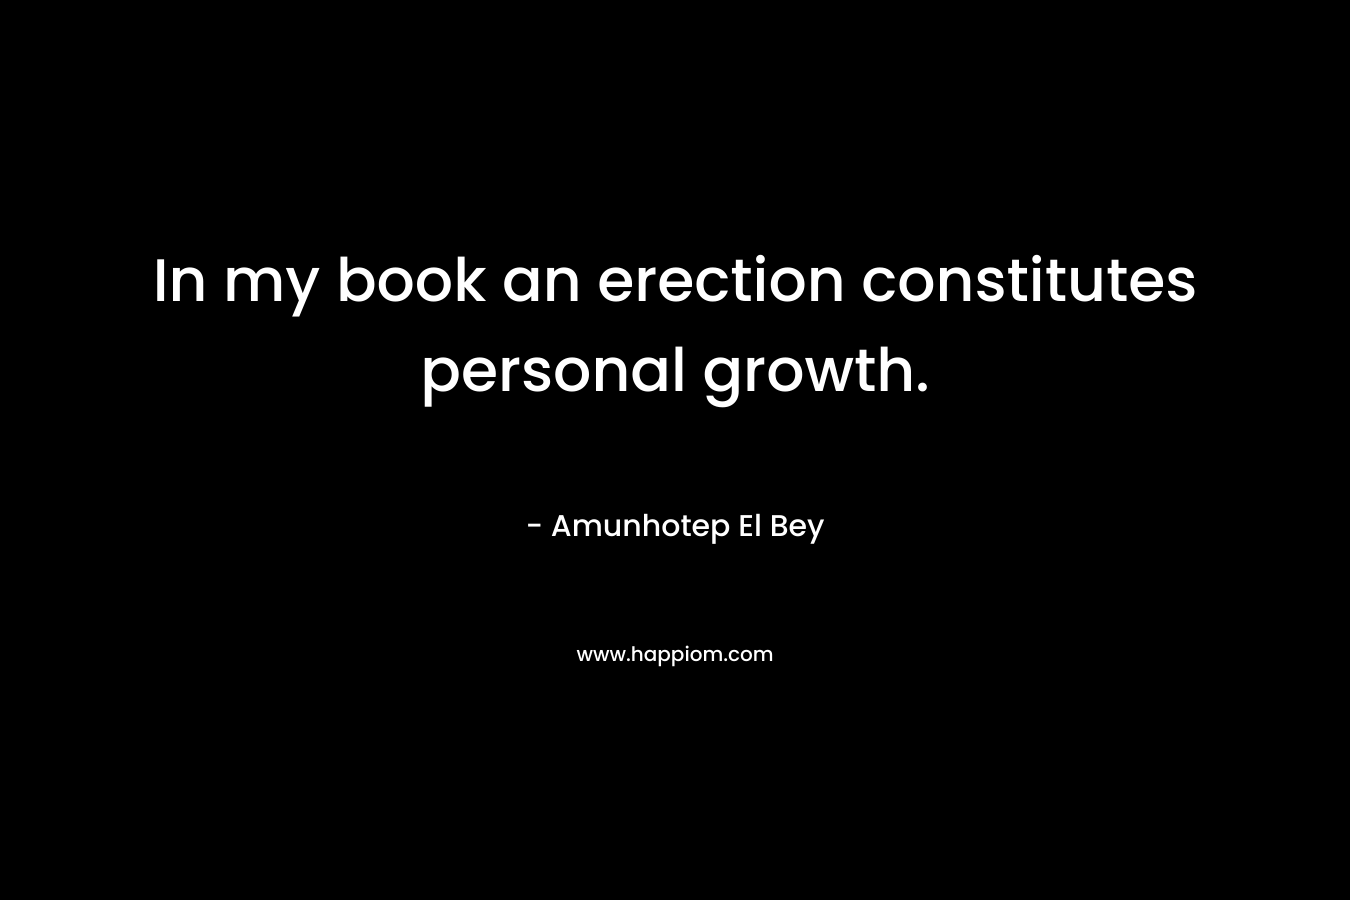 In my book an erection constitutes personal growth. – Amunhotep El Bey